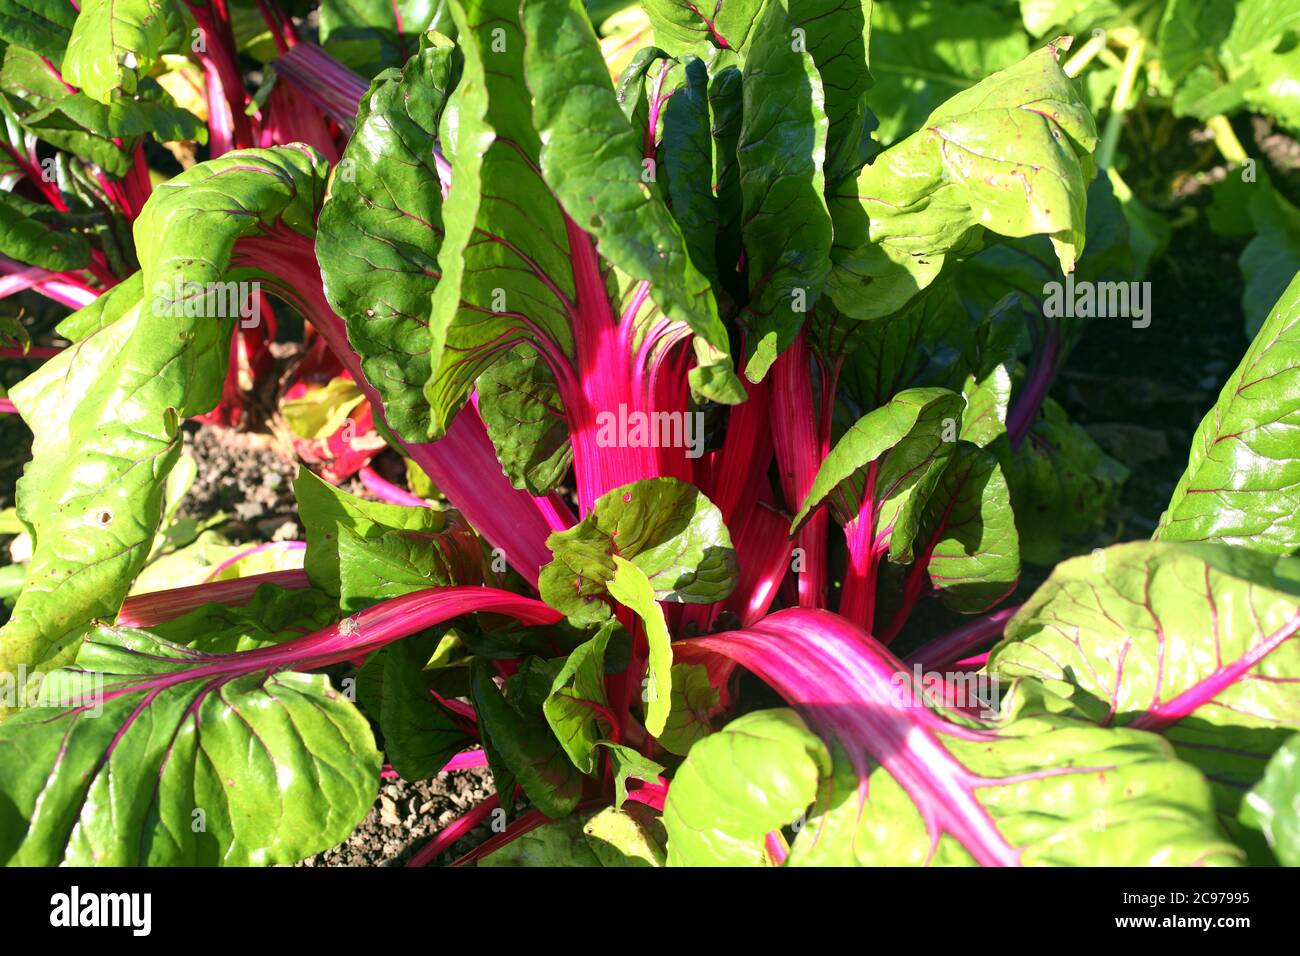 Swiss chard, Beta vulgaris subsp Cicla var flavescens 'Pink Passion' a vegetable salad crop food with health diet benefits stock photo Stock Photo